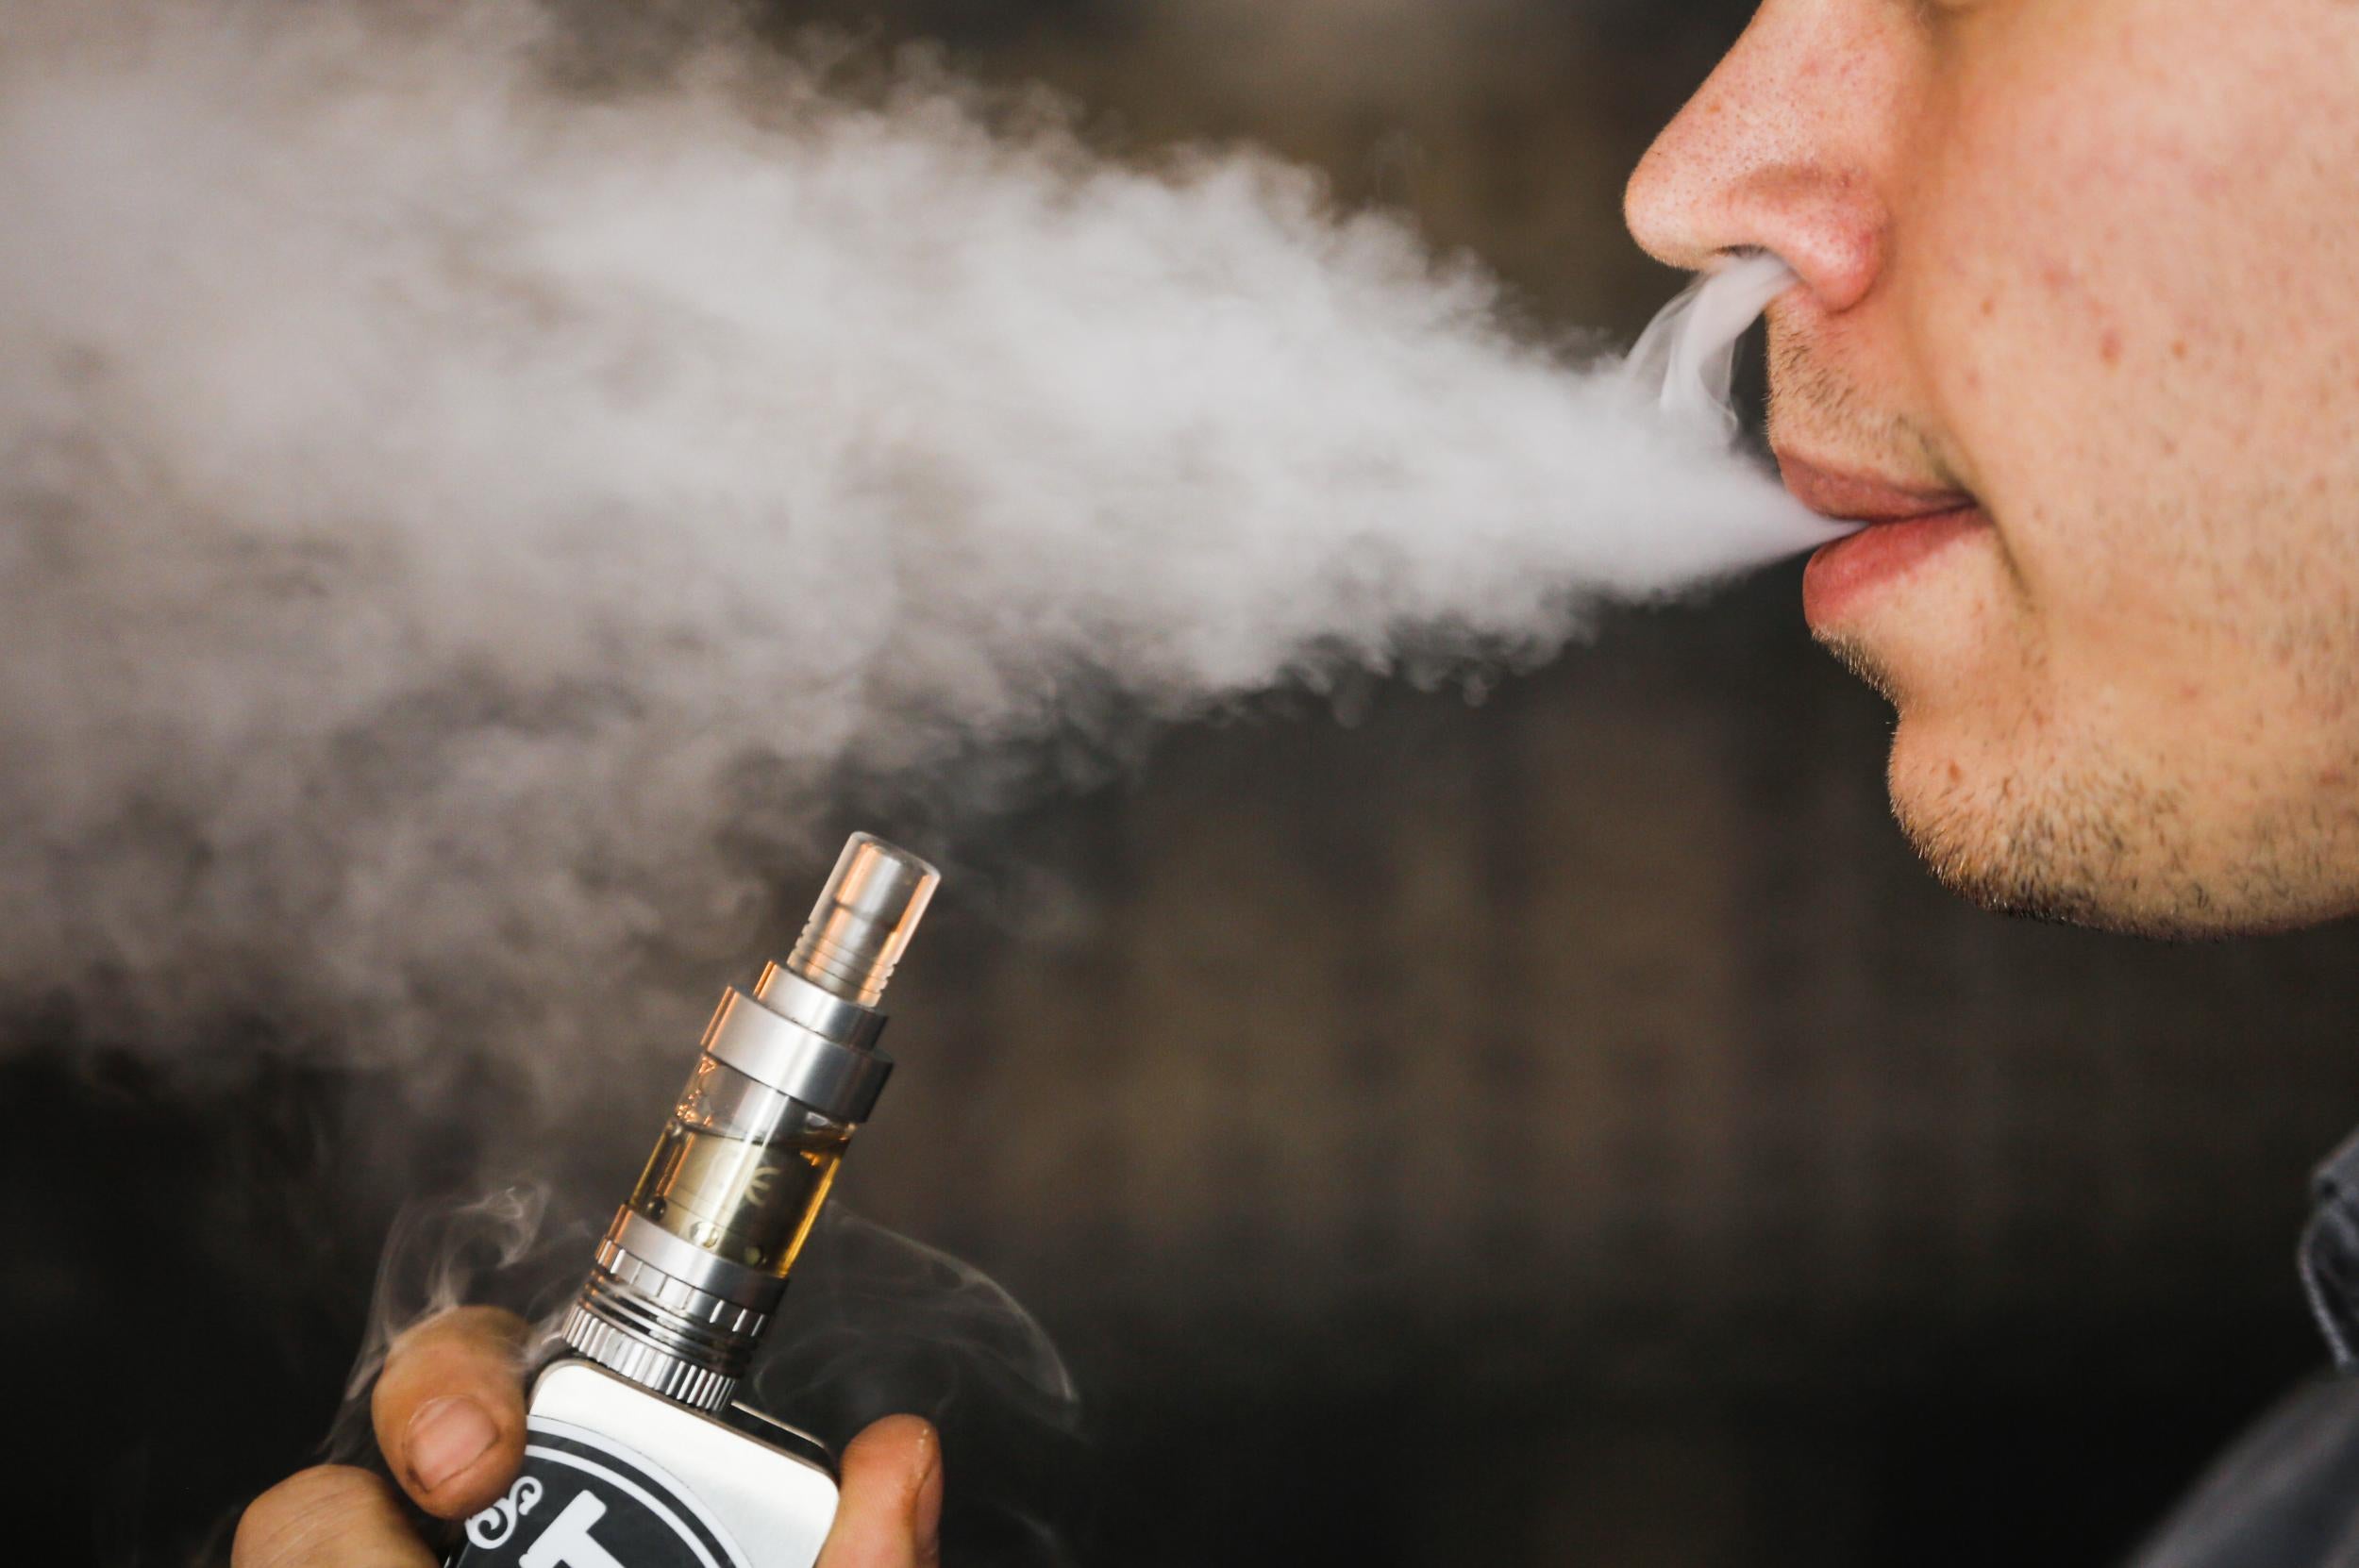 The US Food and Drug Administration (FDA) has said e-cigarette manufacturers need to stop making their products attractive to children